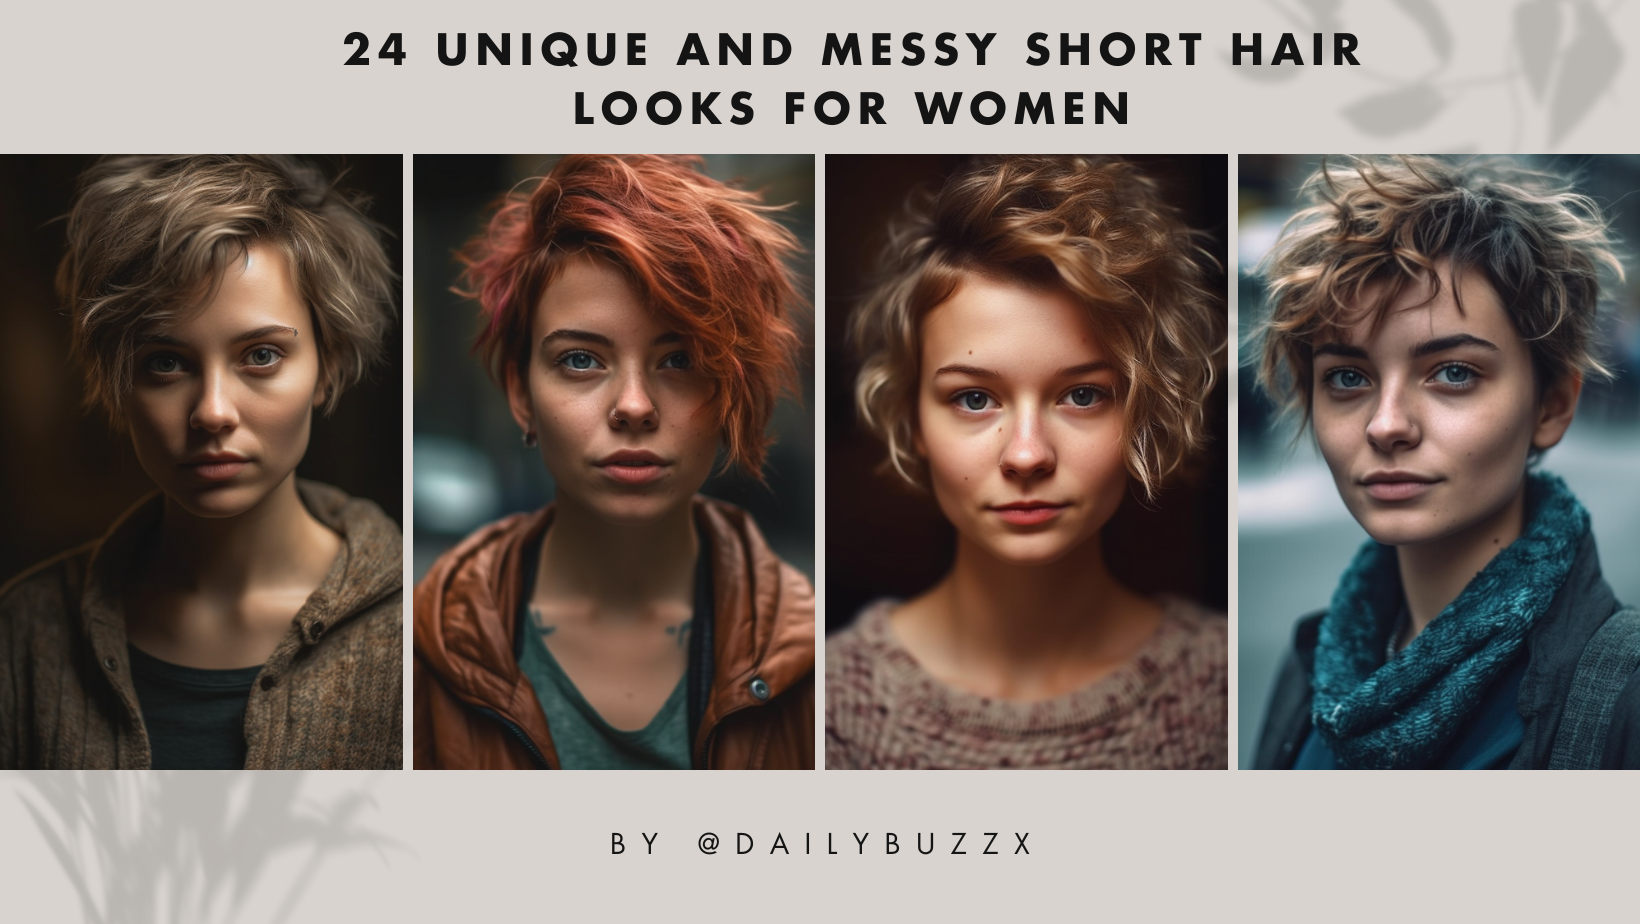 24 Unique and Messy Short Hair Looks for Women